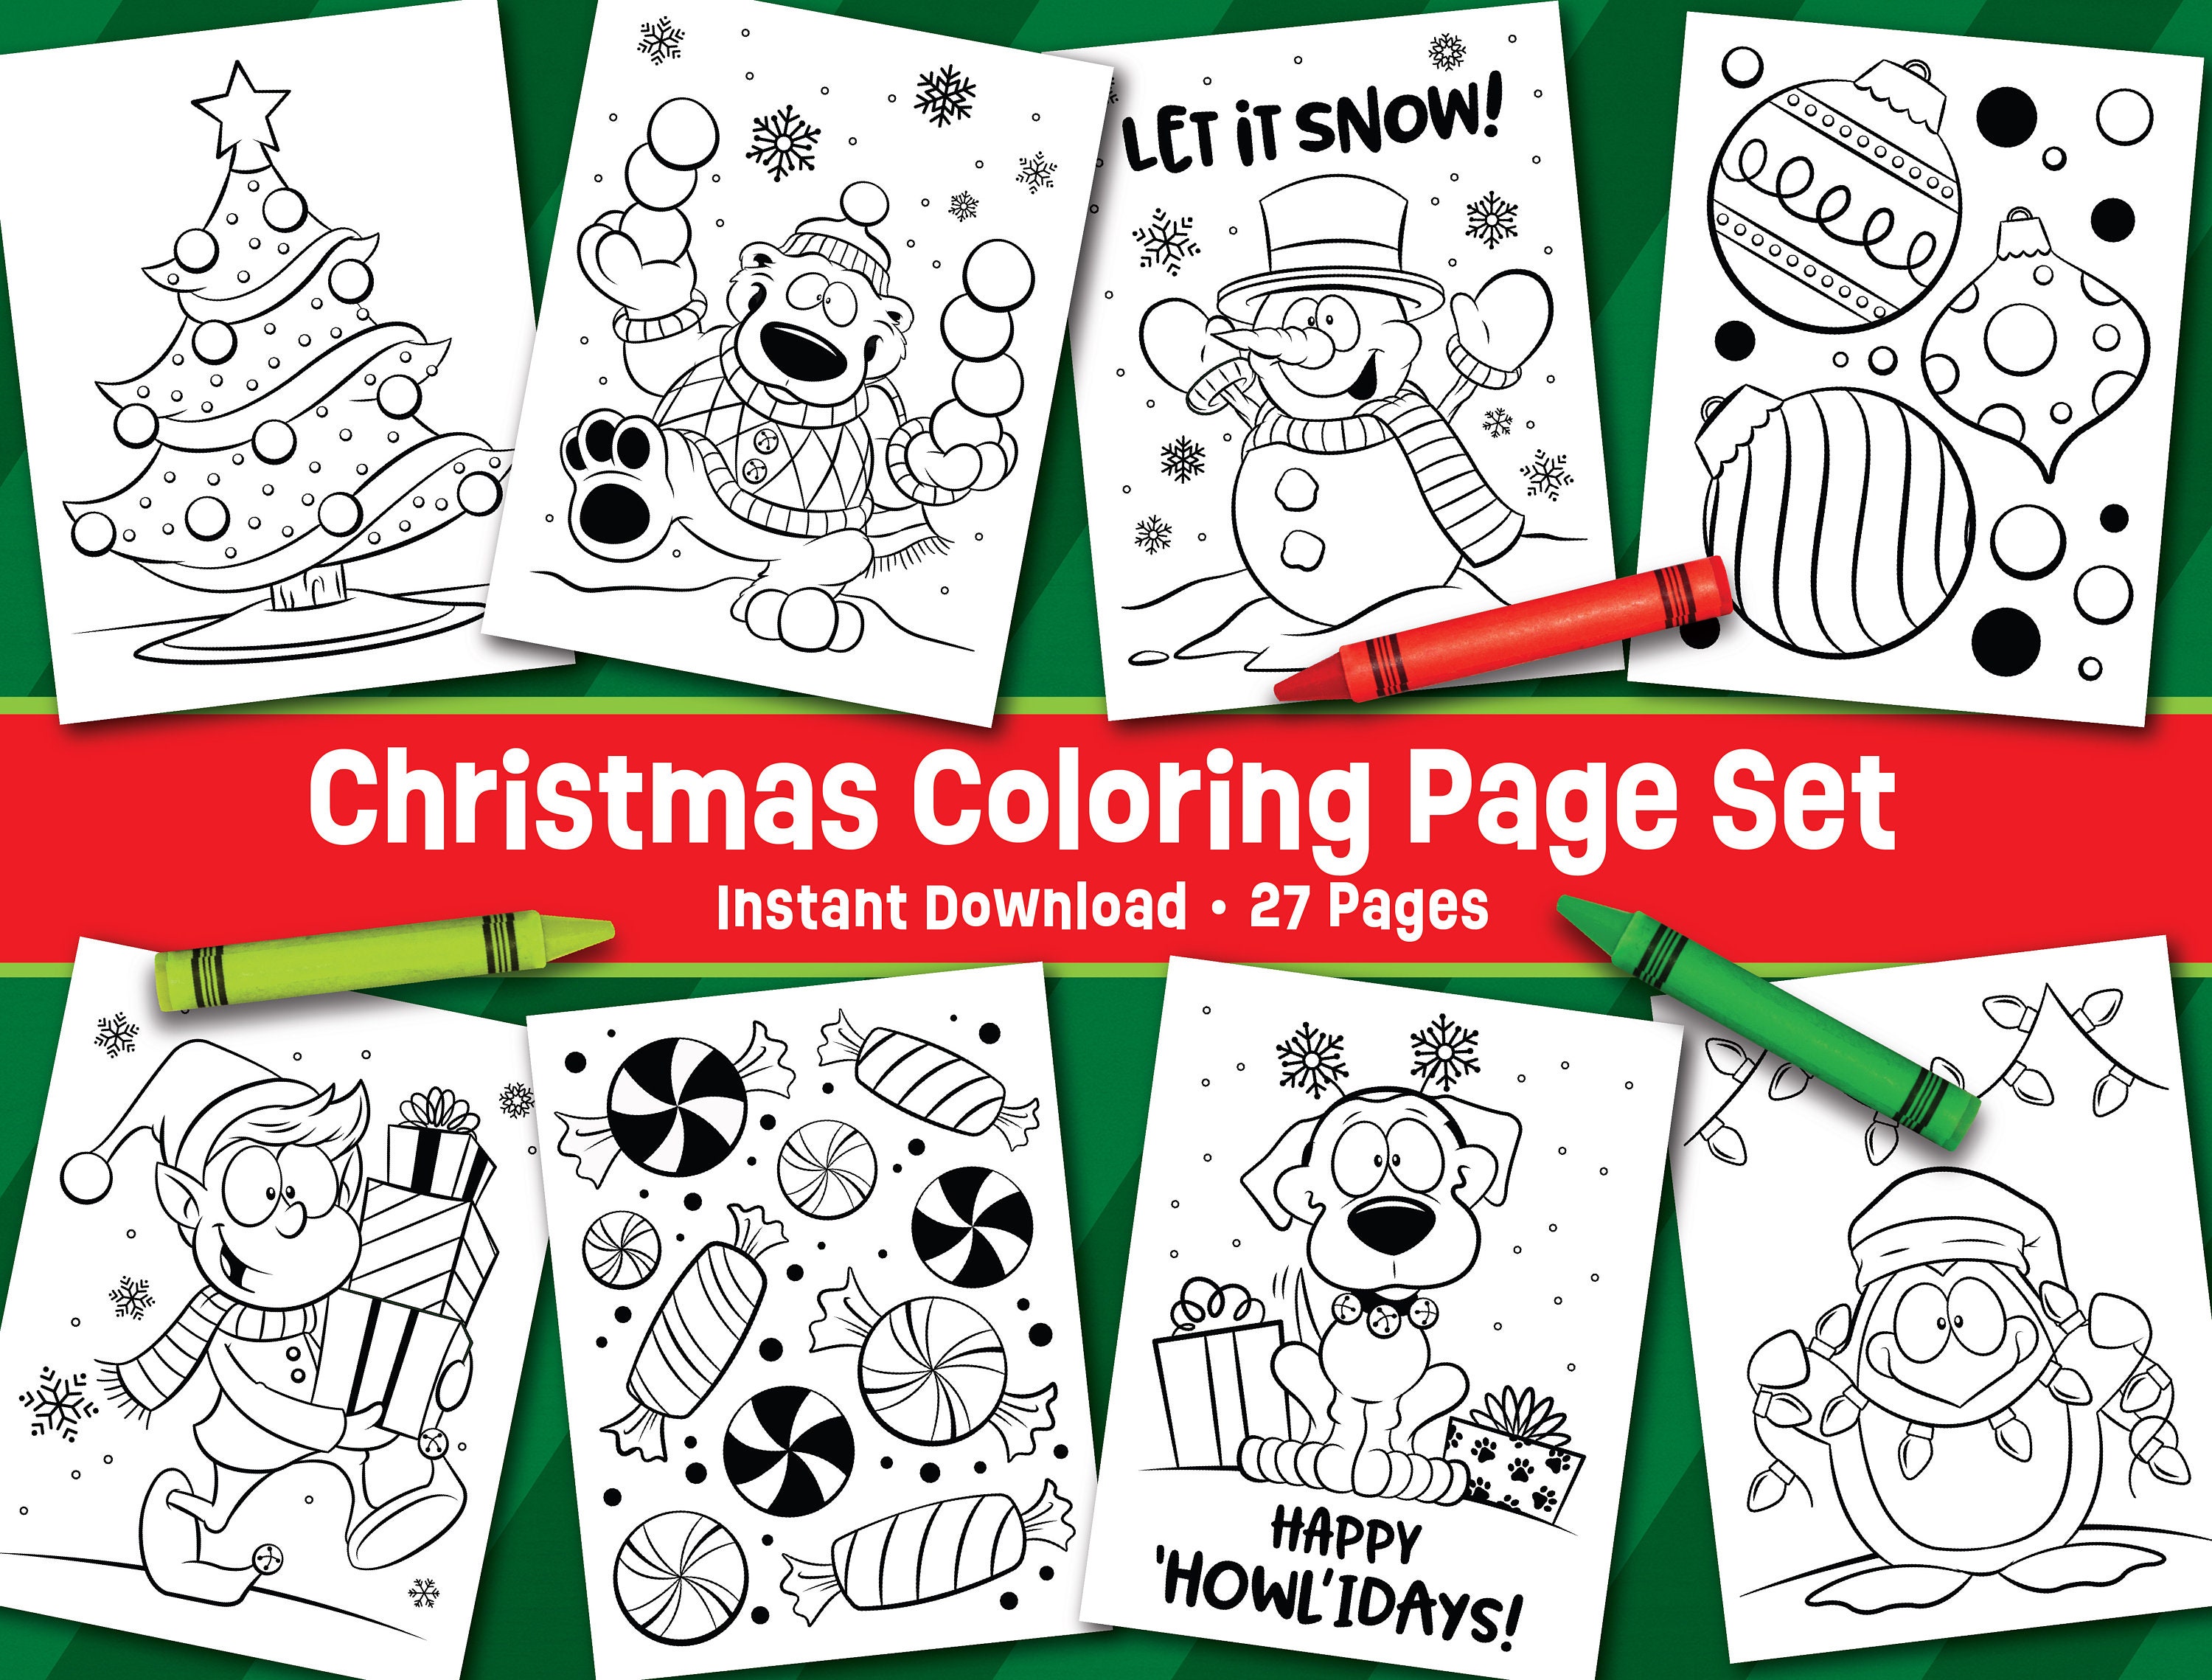 HUGE Christmas Coloring Poster and Holiday Coloring Pages 